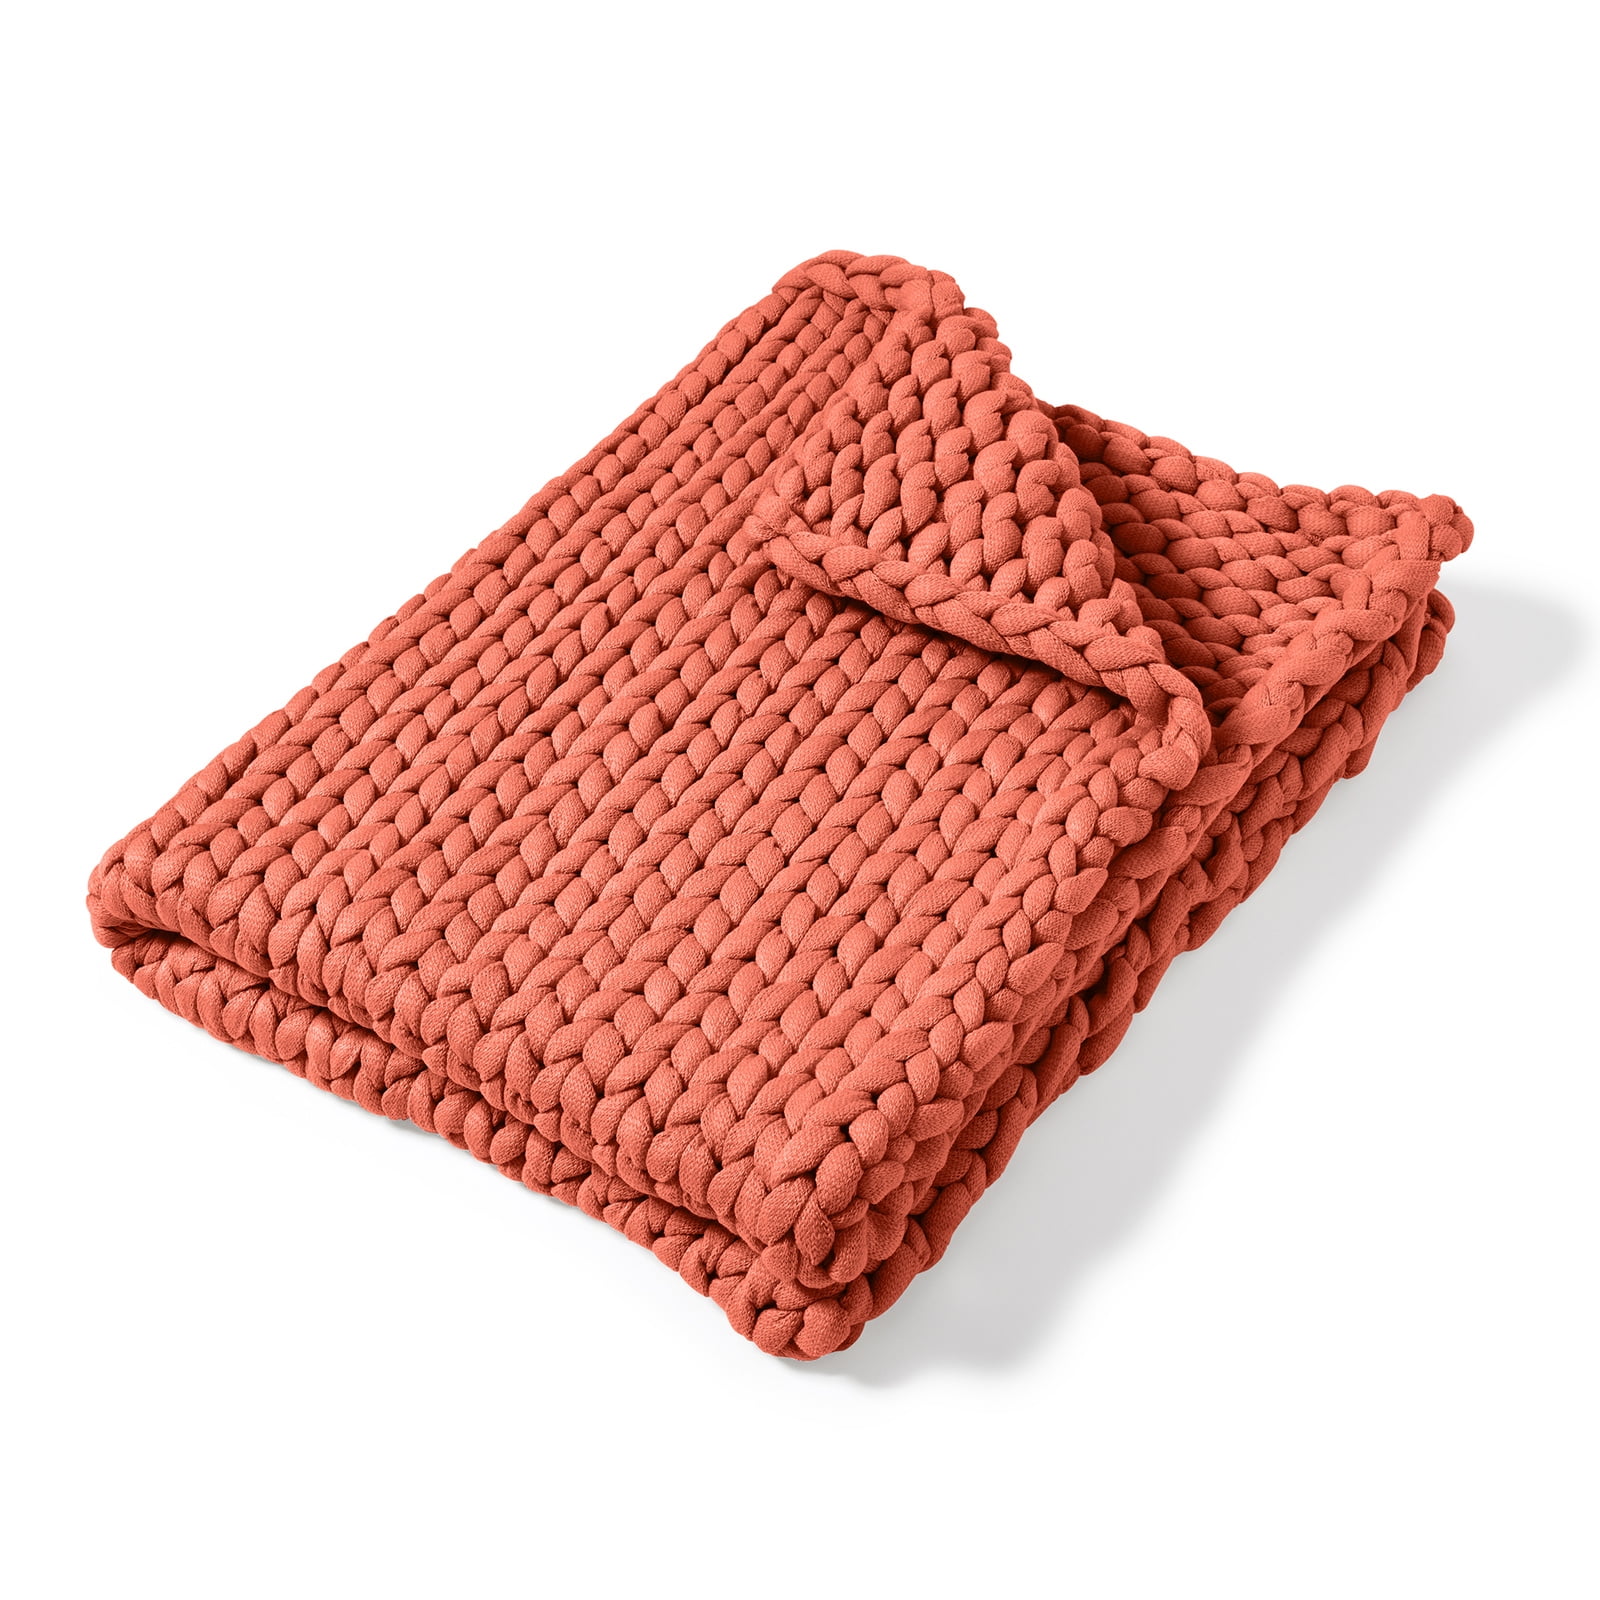 Picture of American Heritage Textiles 70011 40 x 50 in. Chunky Knit Throw, Coral